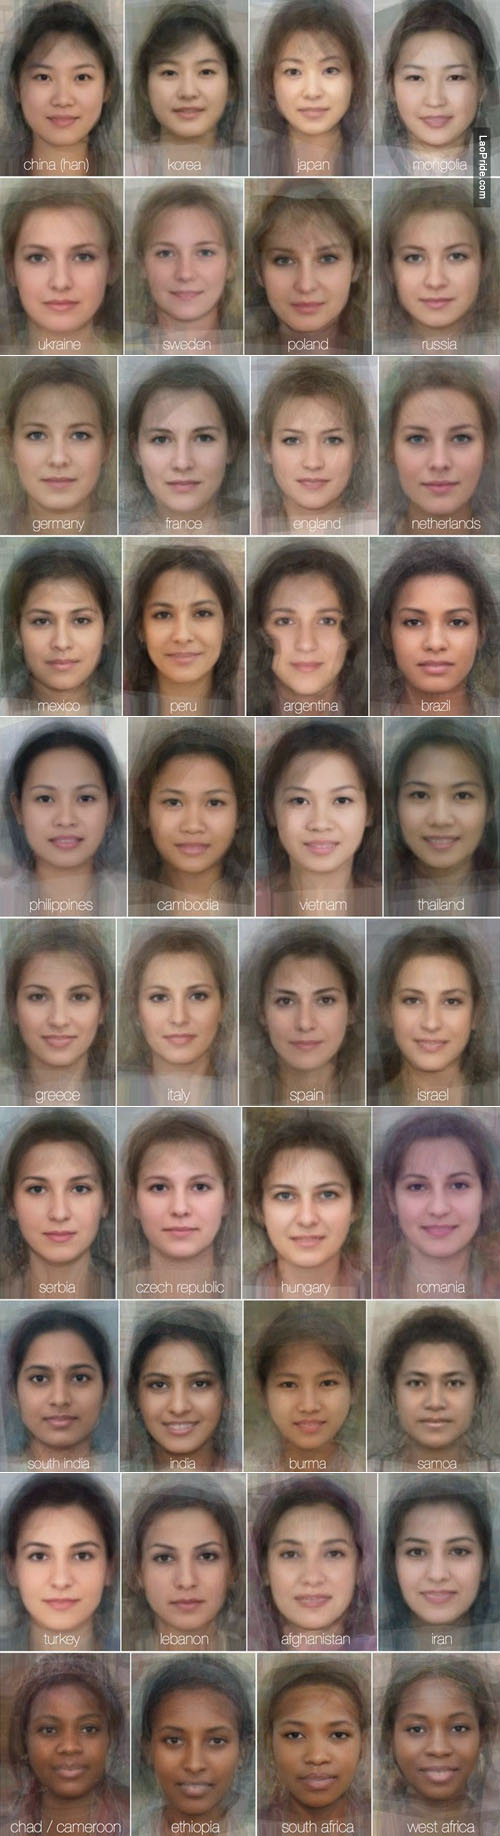 The average female face for each country